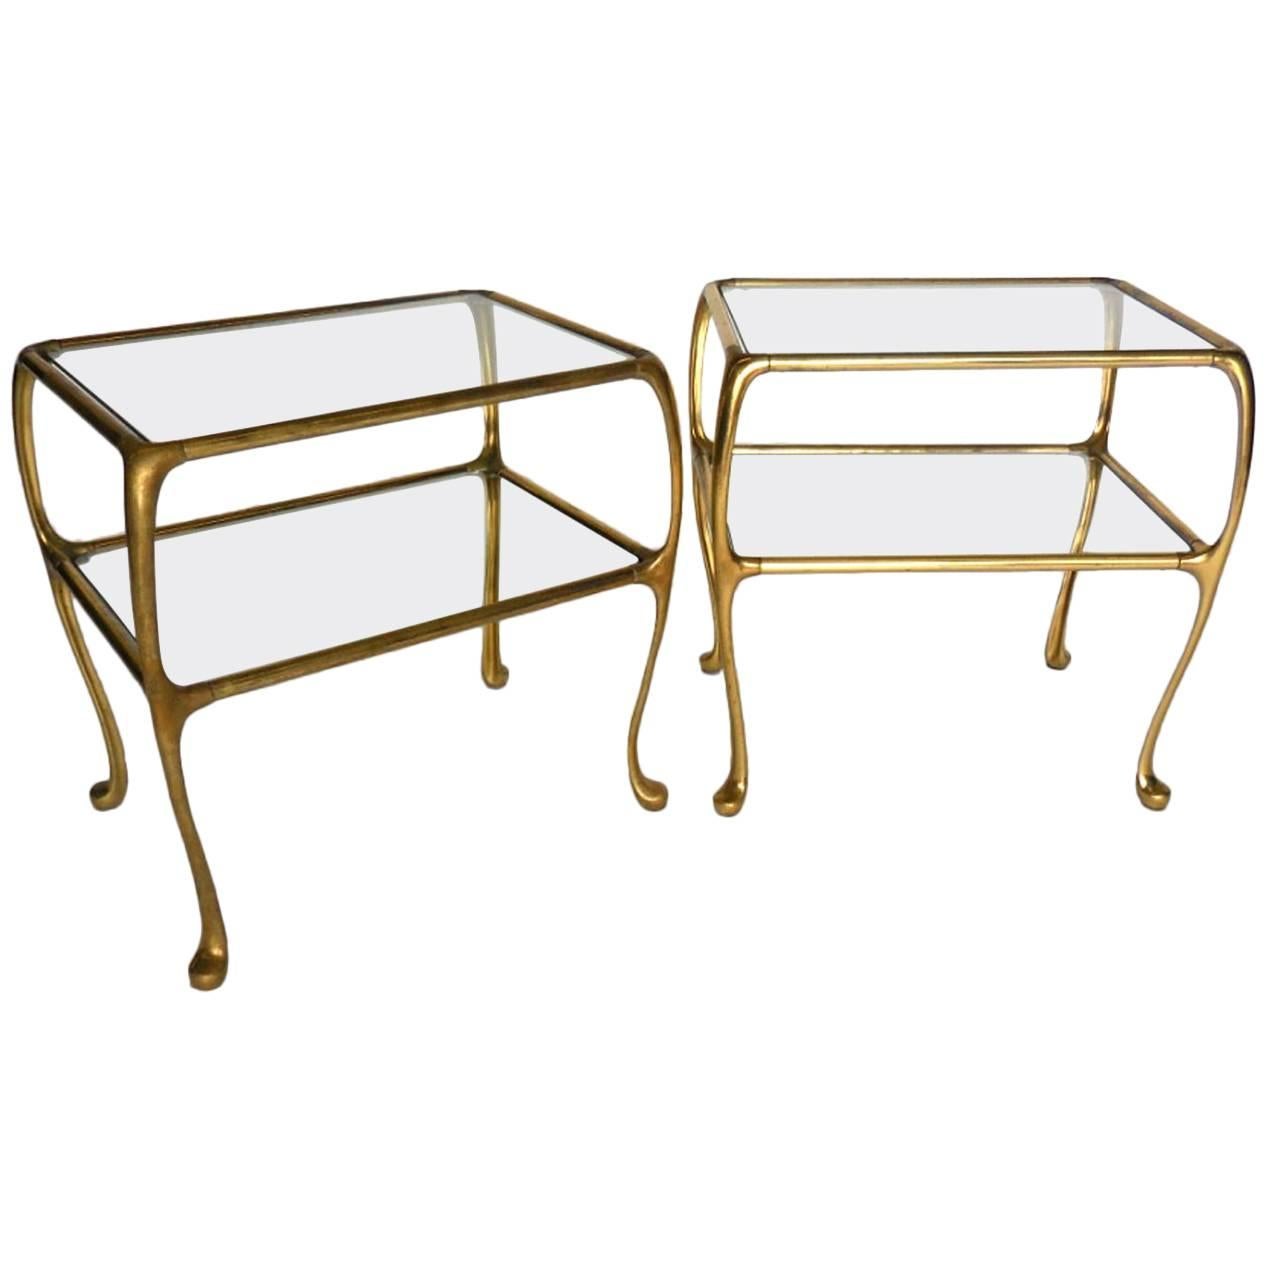 Pair of Argentinian Side Tables in Brass with Glass Top and Shelf